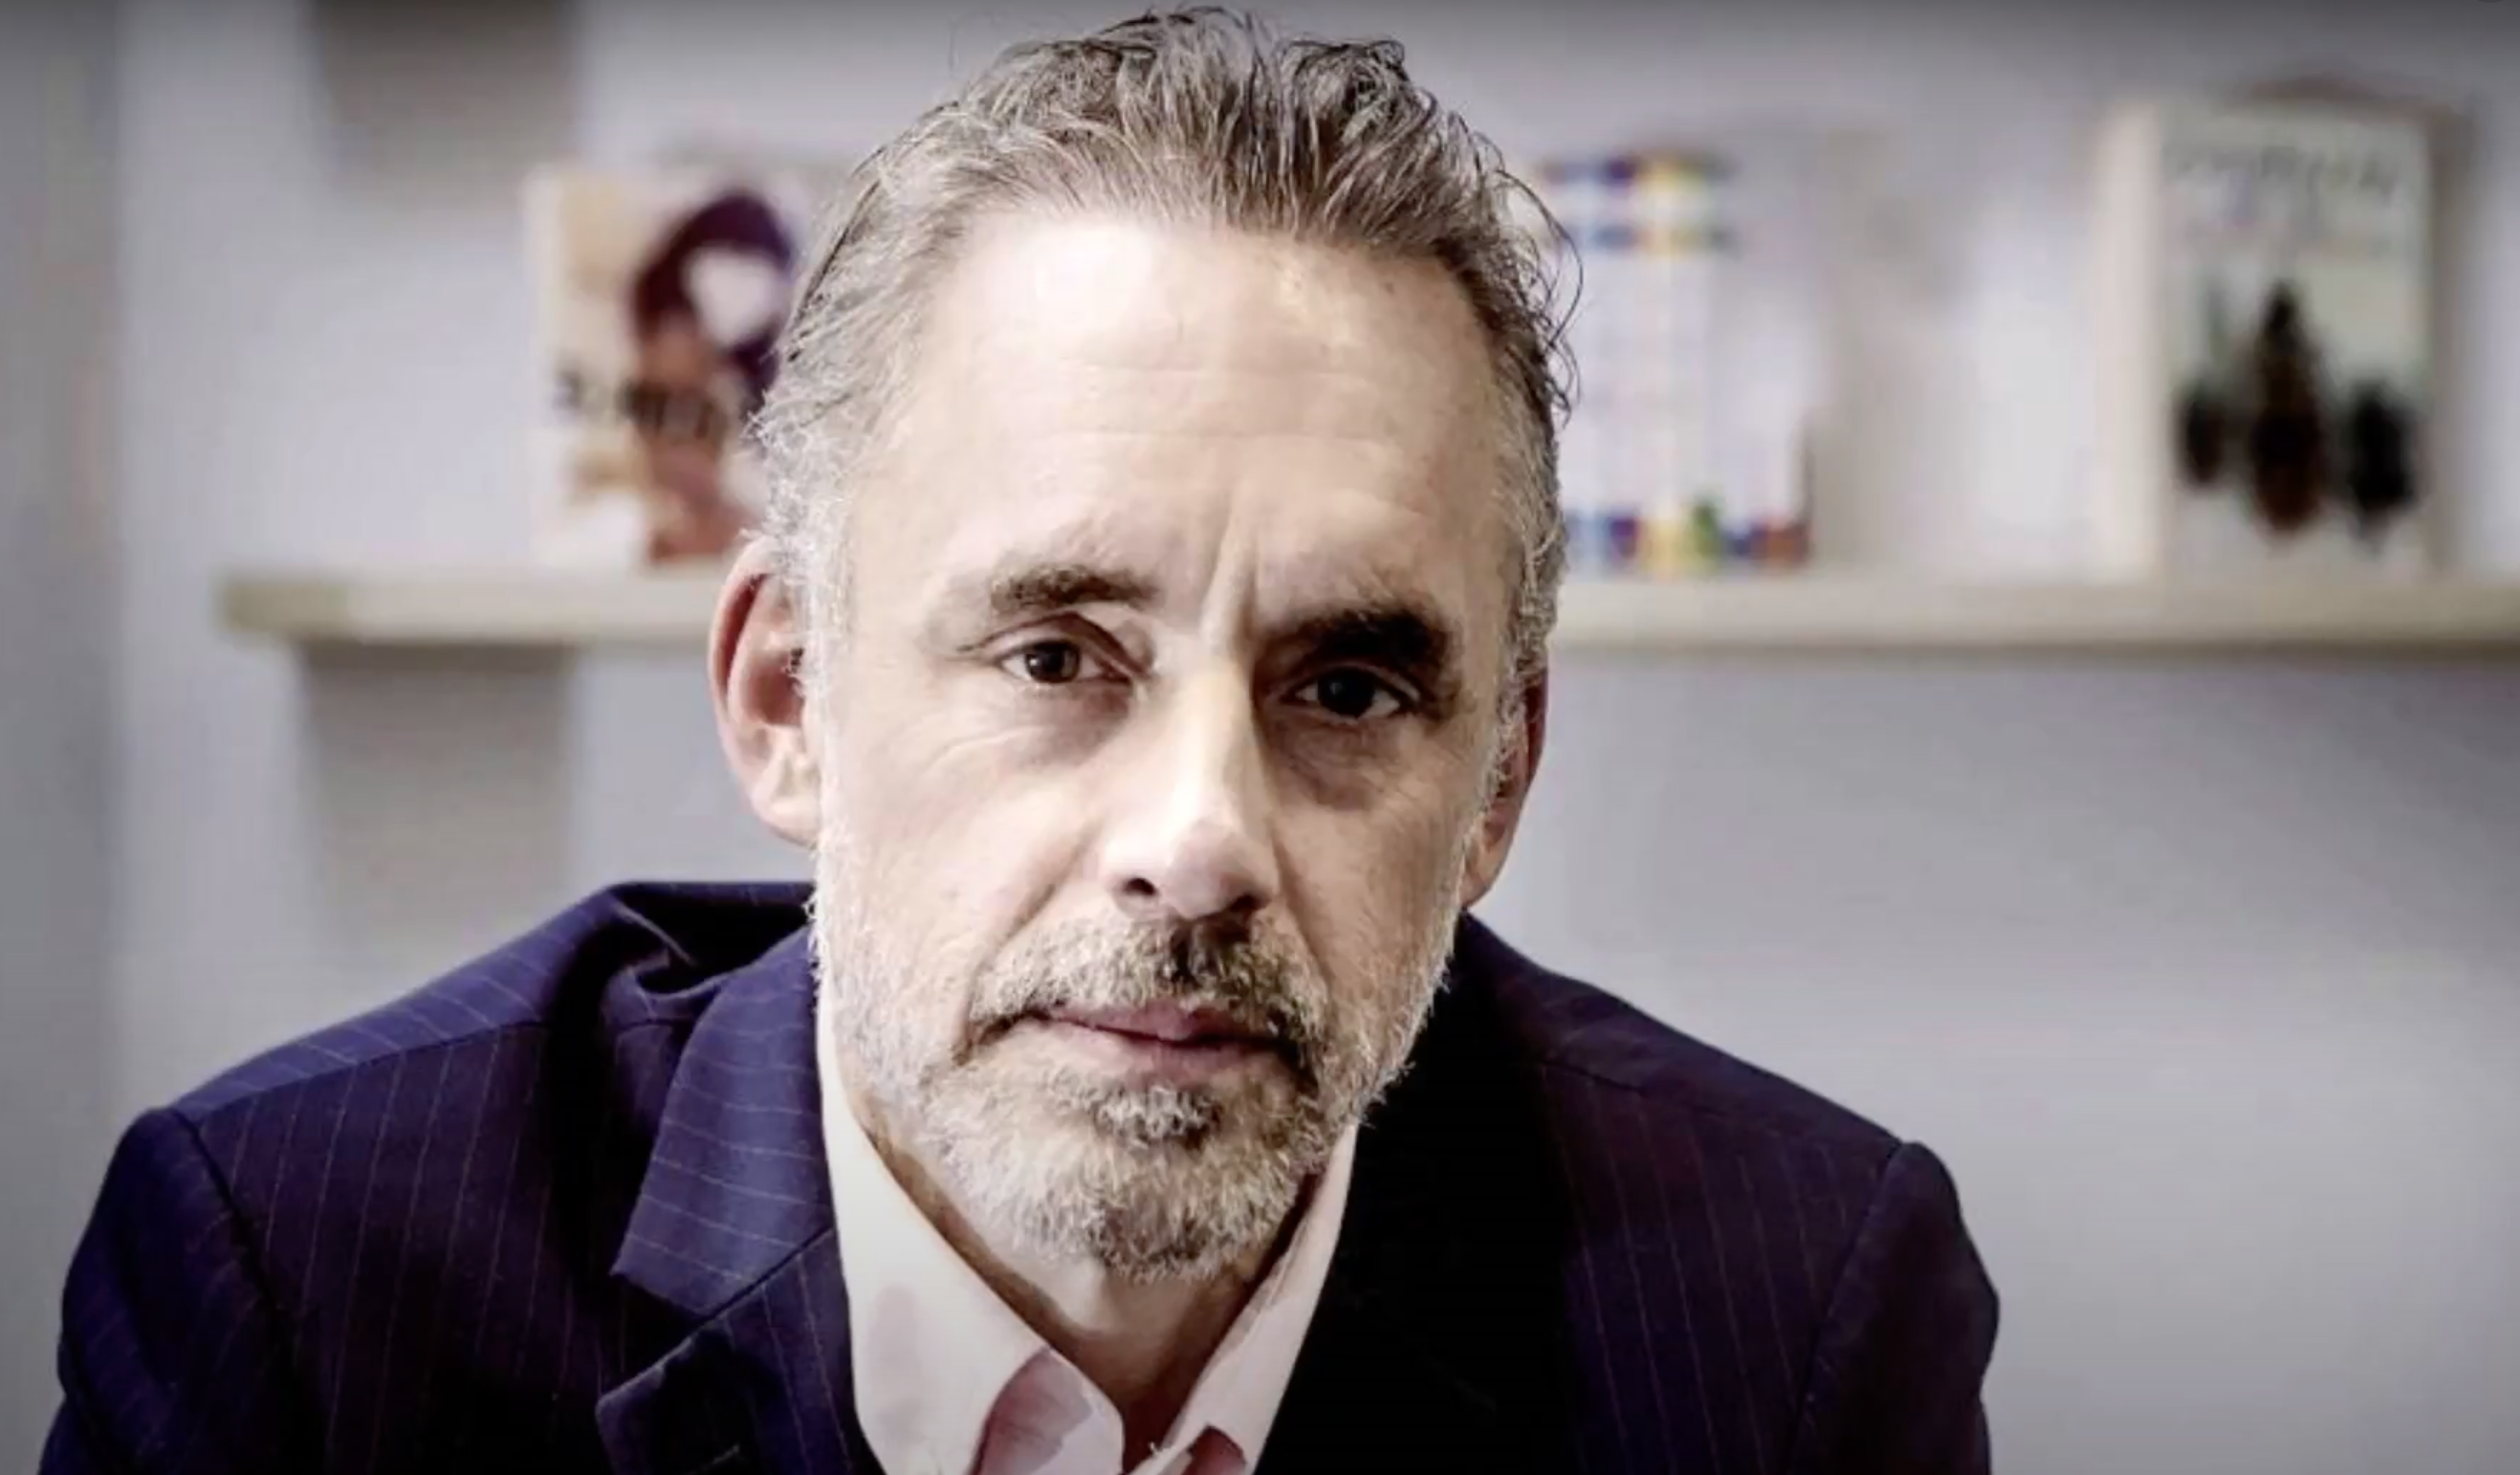 Jordan Peterson returns to Durham 4 years after city moves to 'cancel' him - Carolina Journal